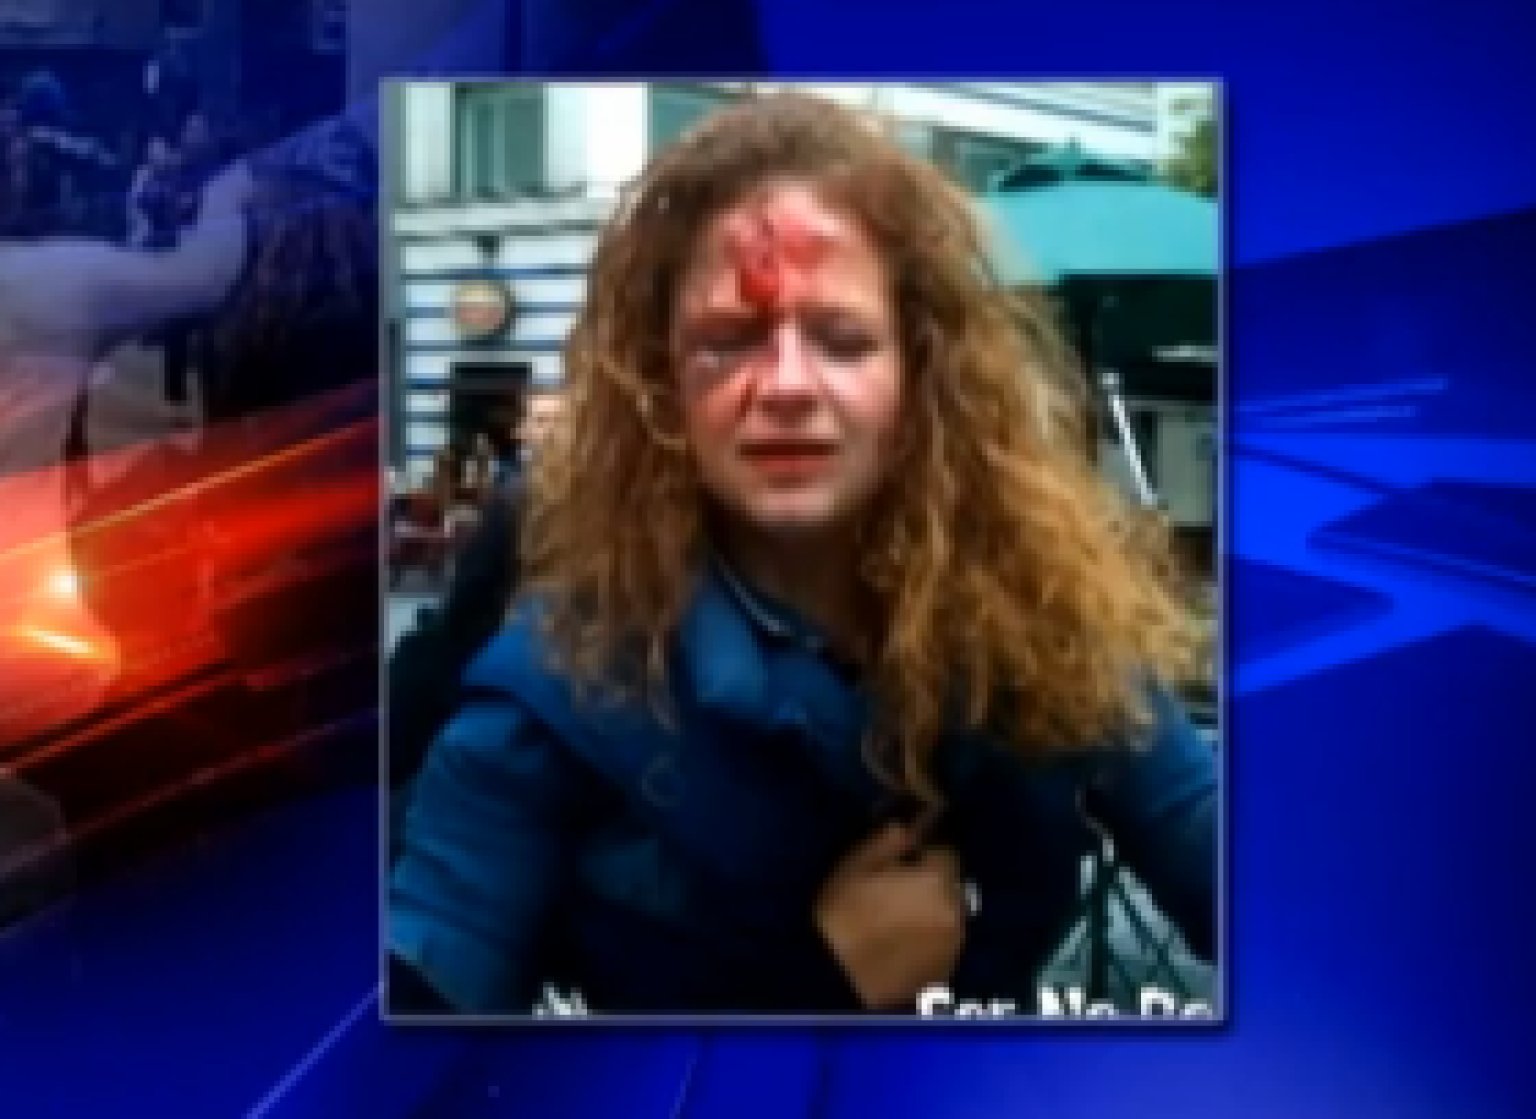 Seattle Woman Beaten By 3 Female Suspects In Cell Phone Video Sought By Police